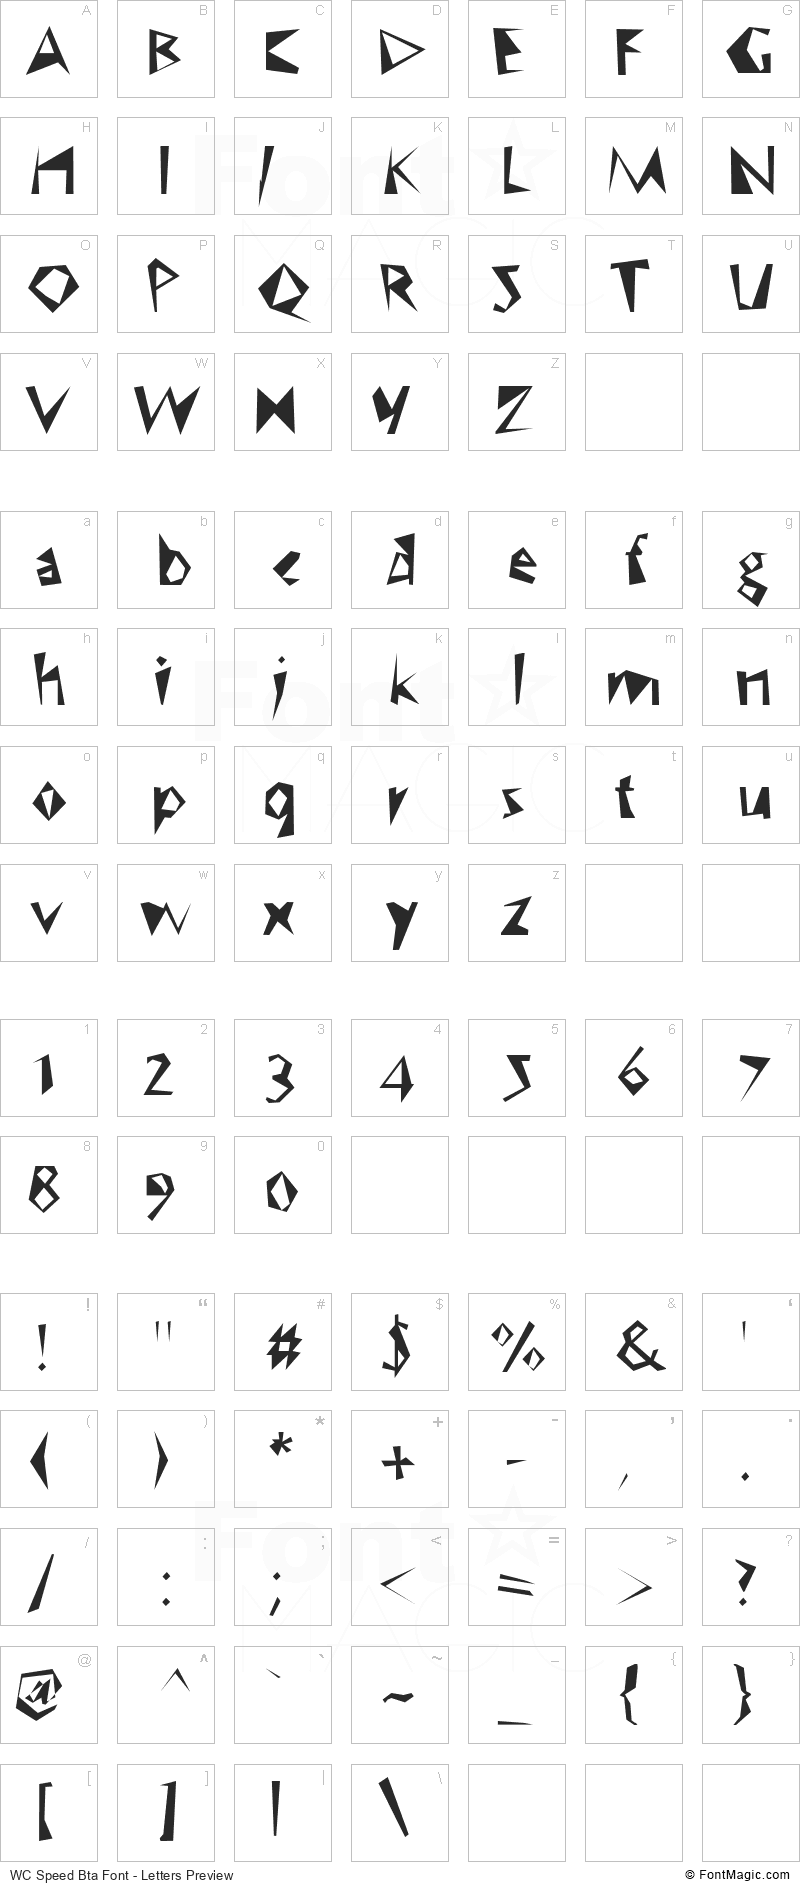 WC Speed Bta Font - All Latters Preview Chart